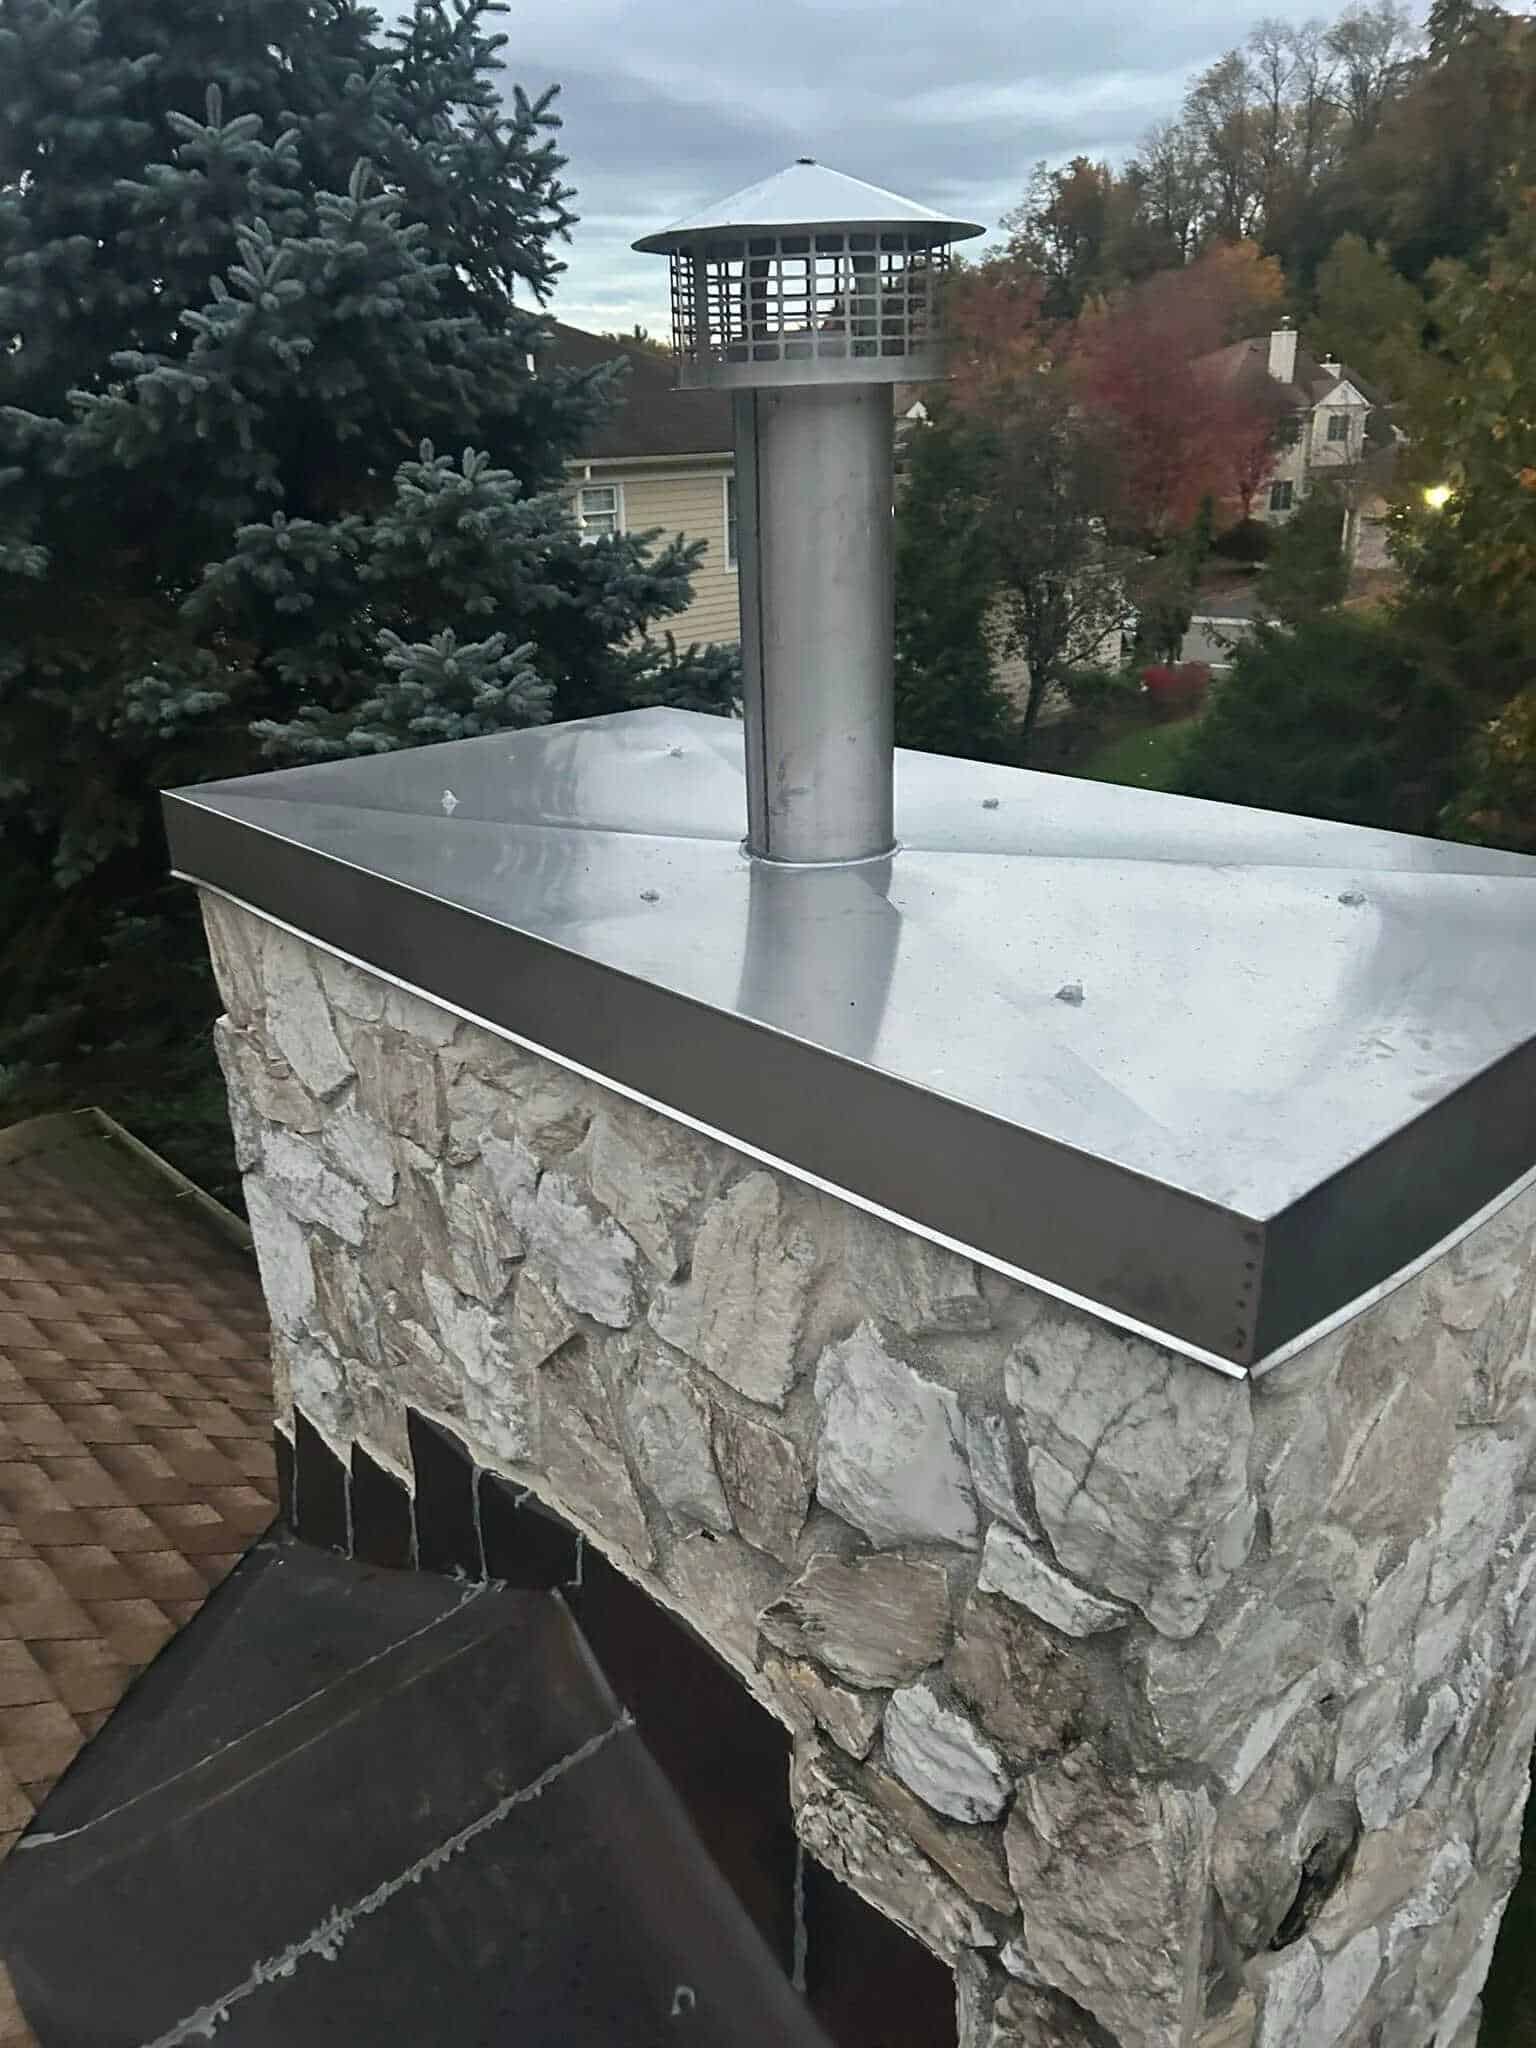 Chimney Repair and Restoration in NYC. Chimney Repairs Westchester County, NY